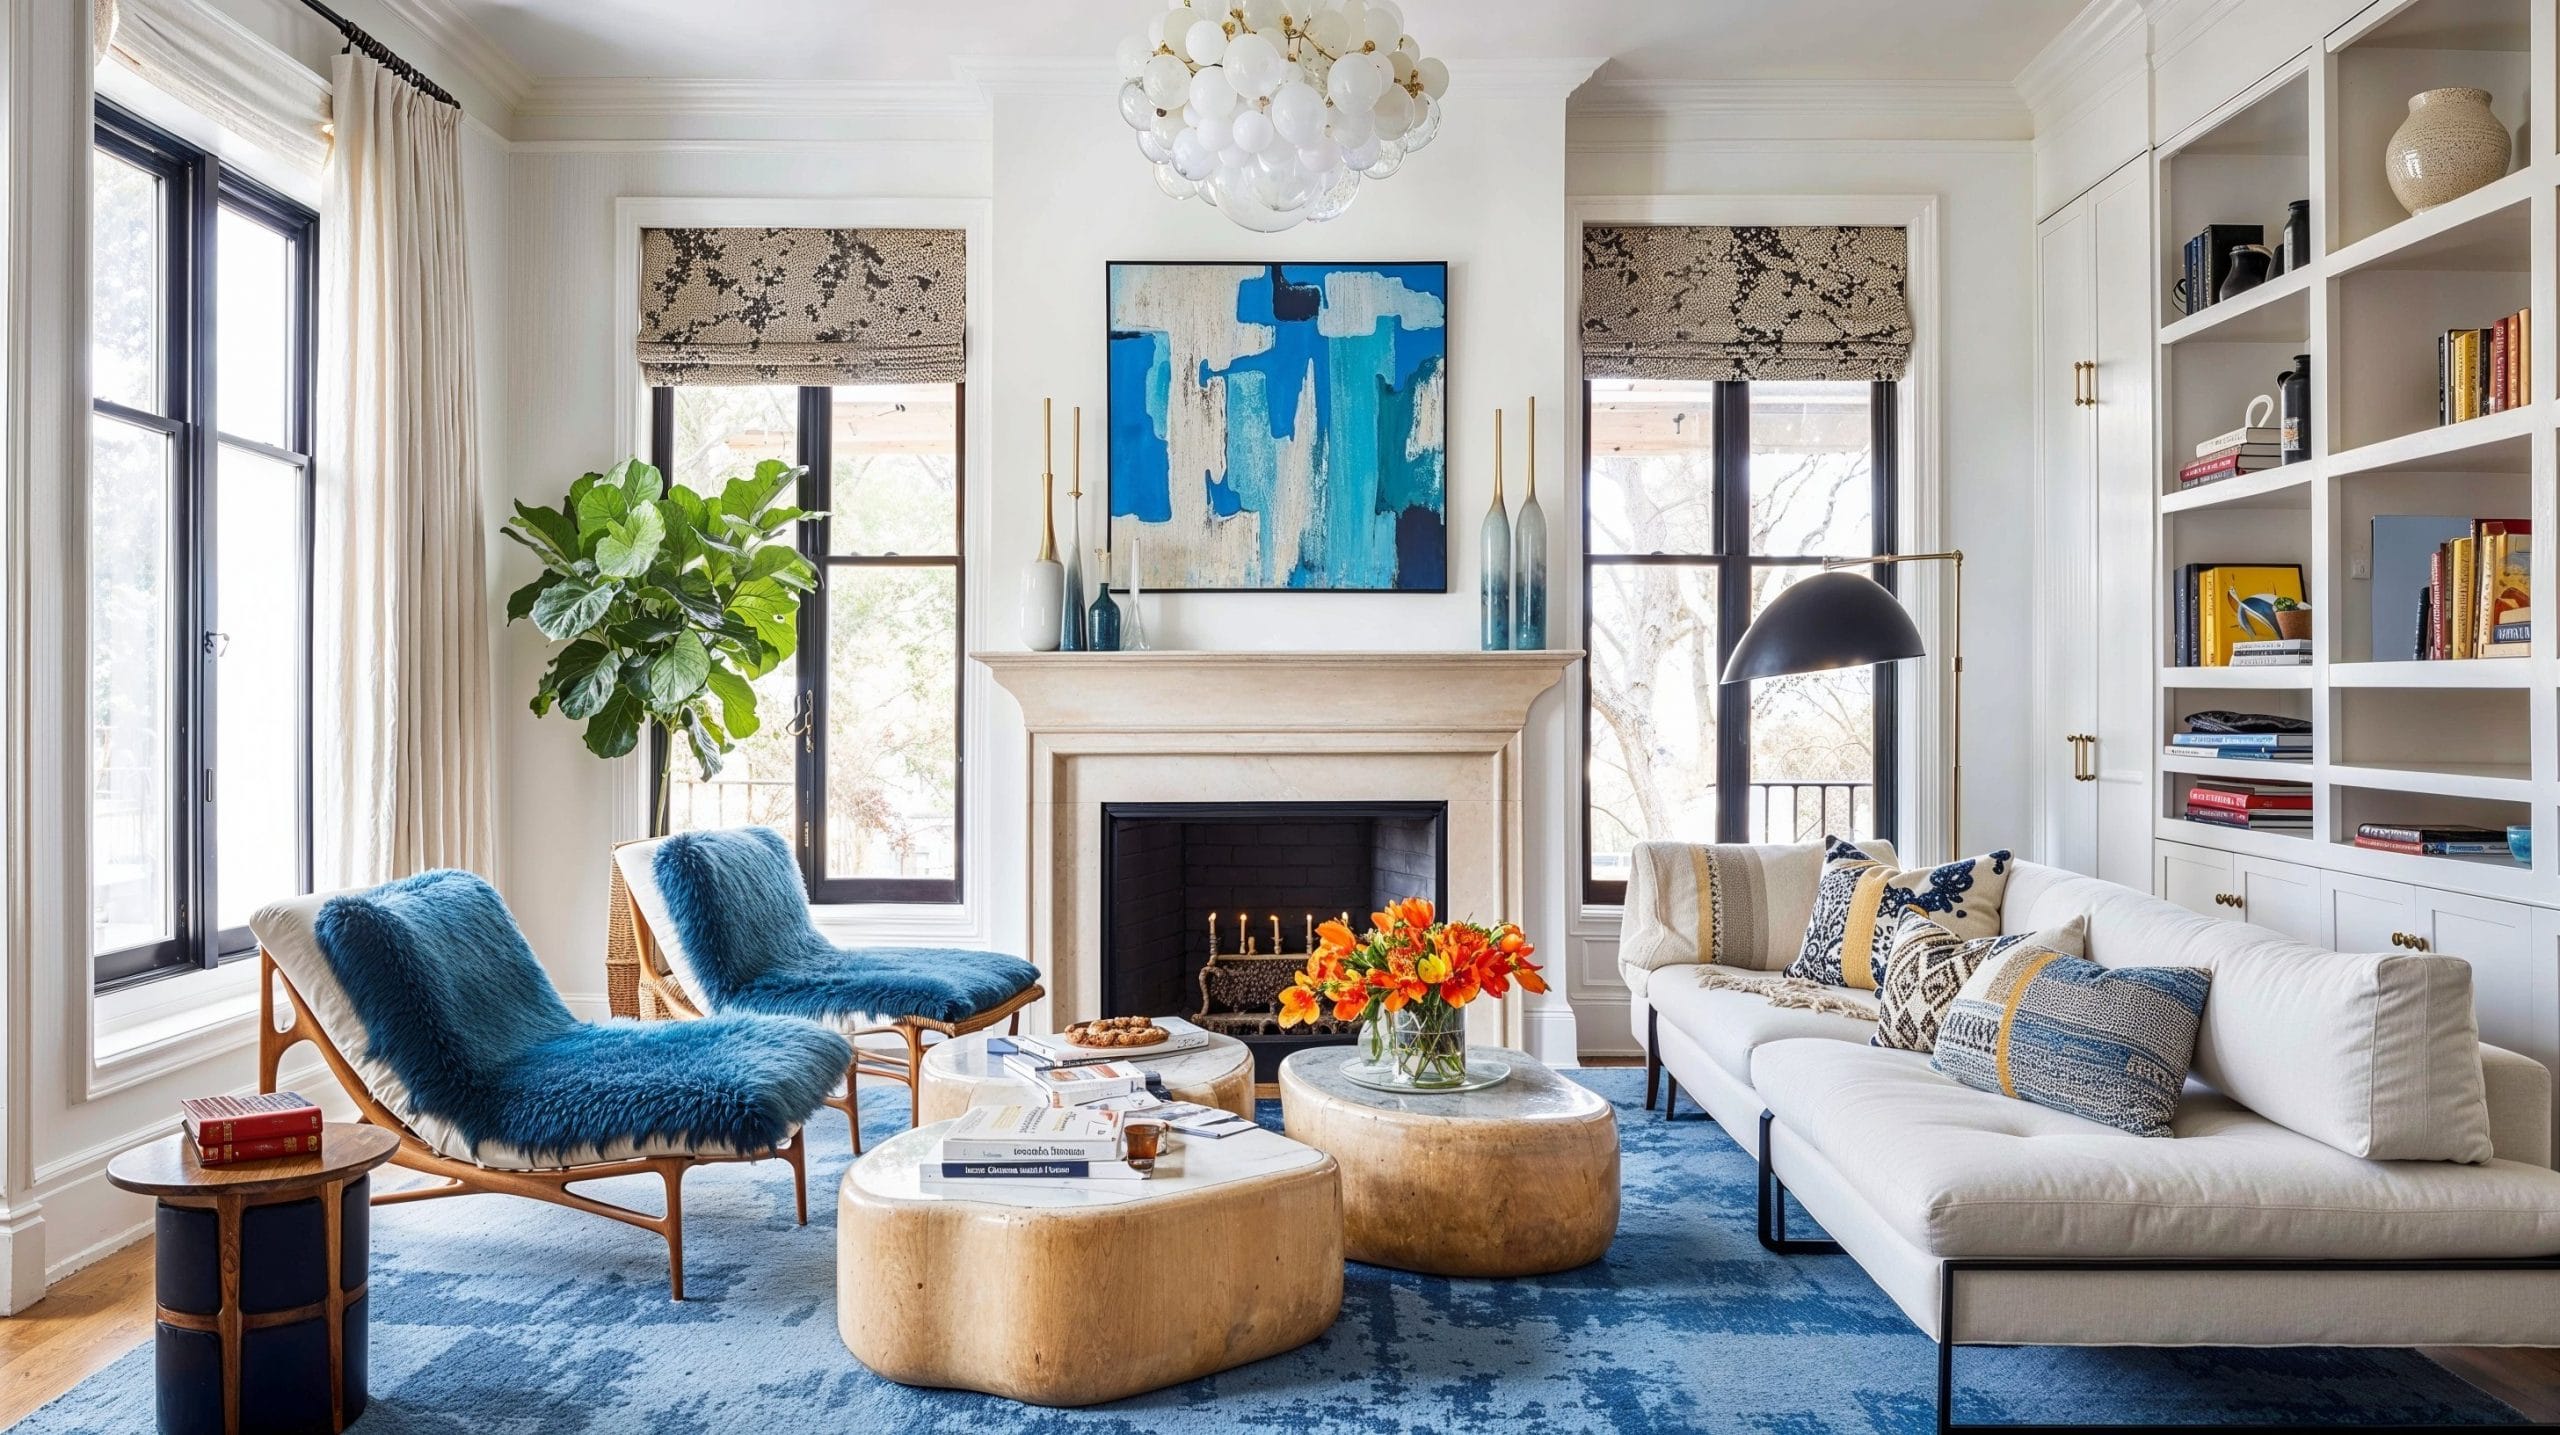 Living Room Inspiration and Advice on How to Create a Stylish